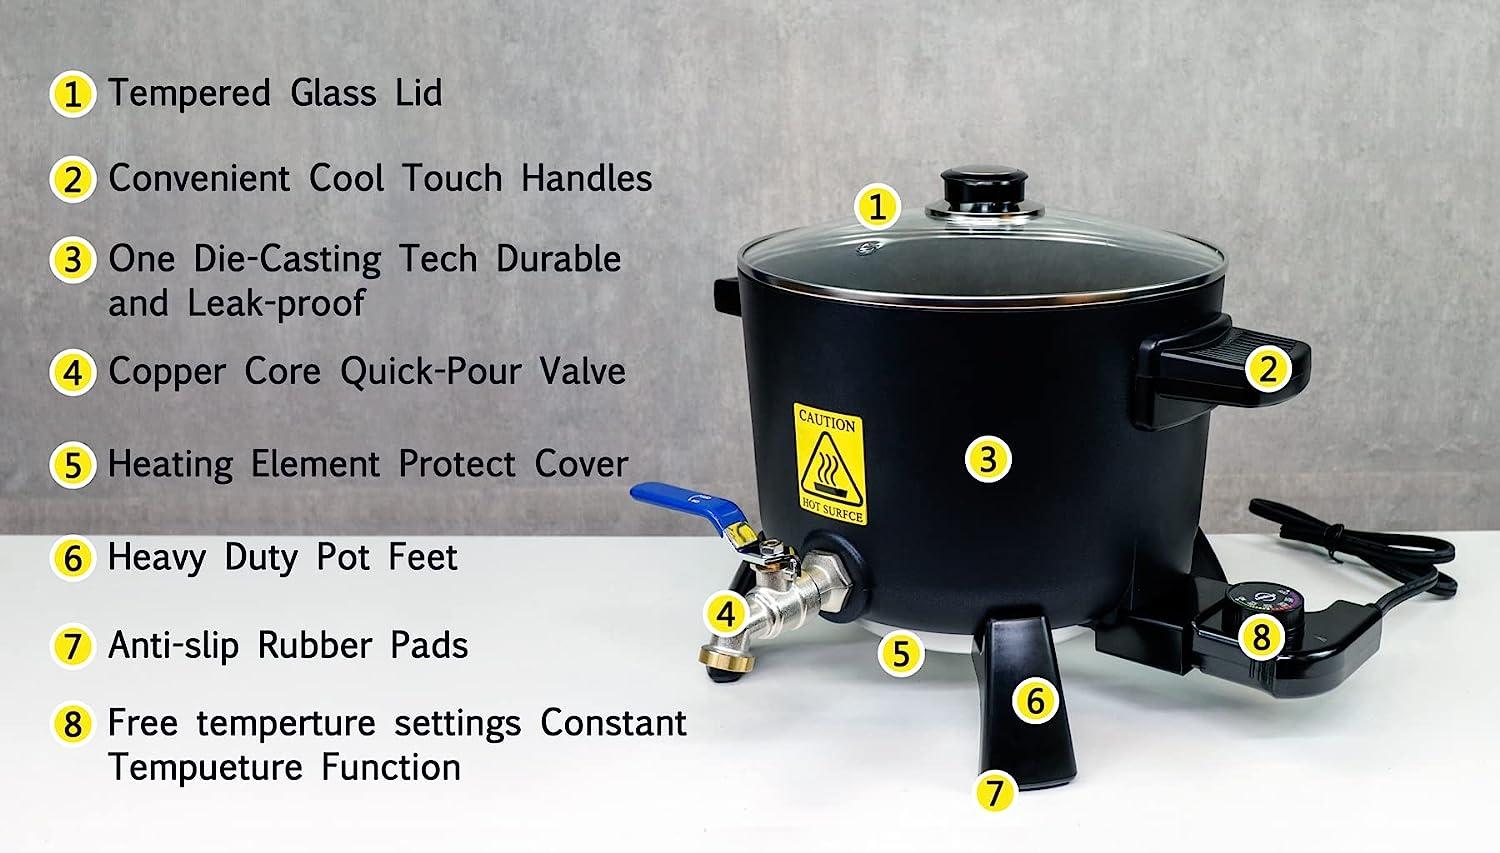 12 LB Electric Wax Melter for Candle Making Melting Furnace with